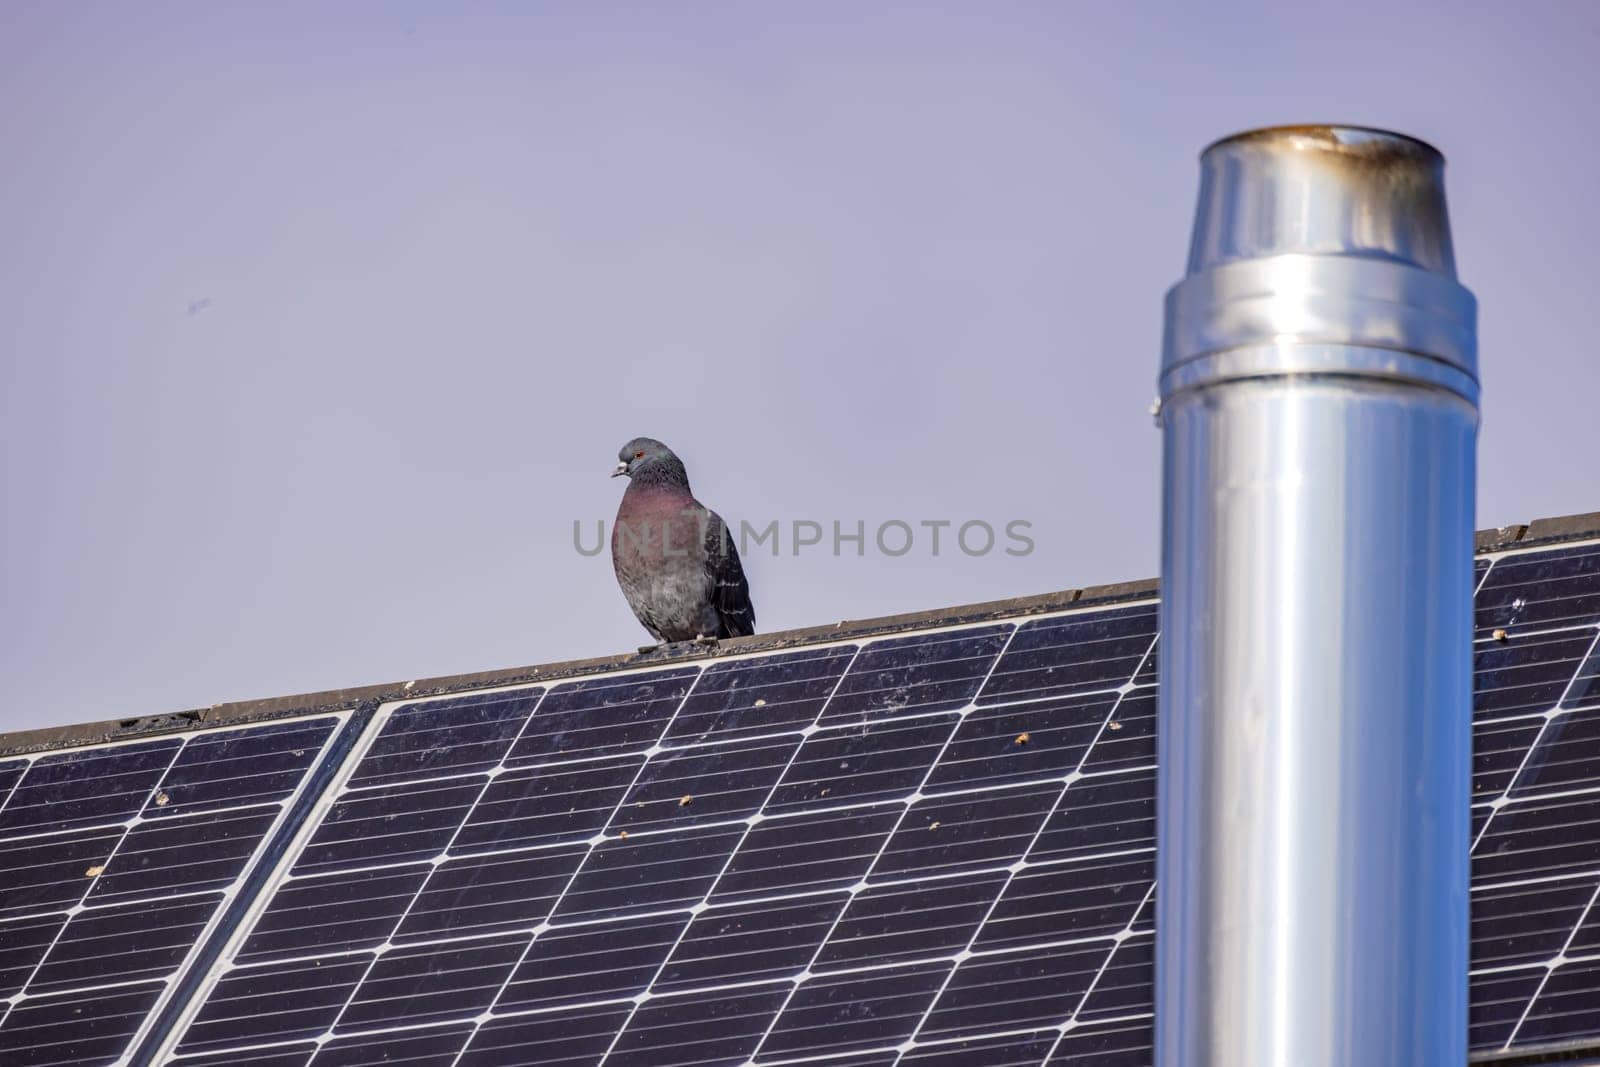 A pigeon on a roof with solar panels soiled by droppings and a chimney by astrosoft